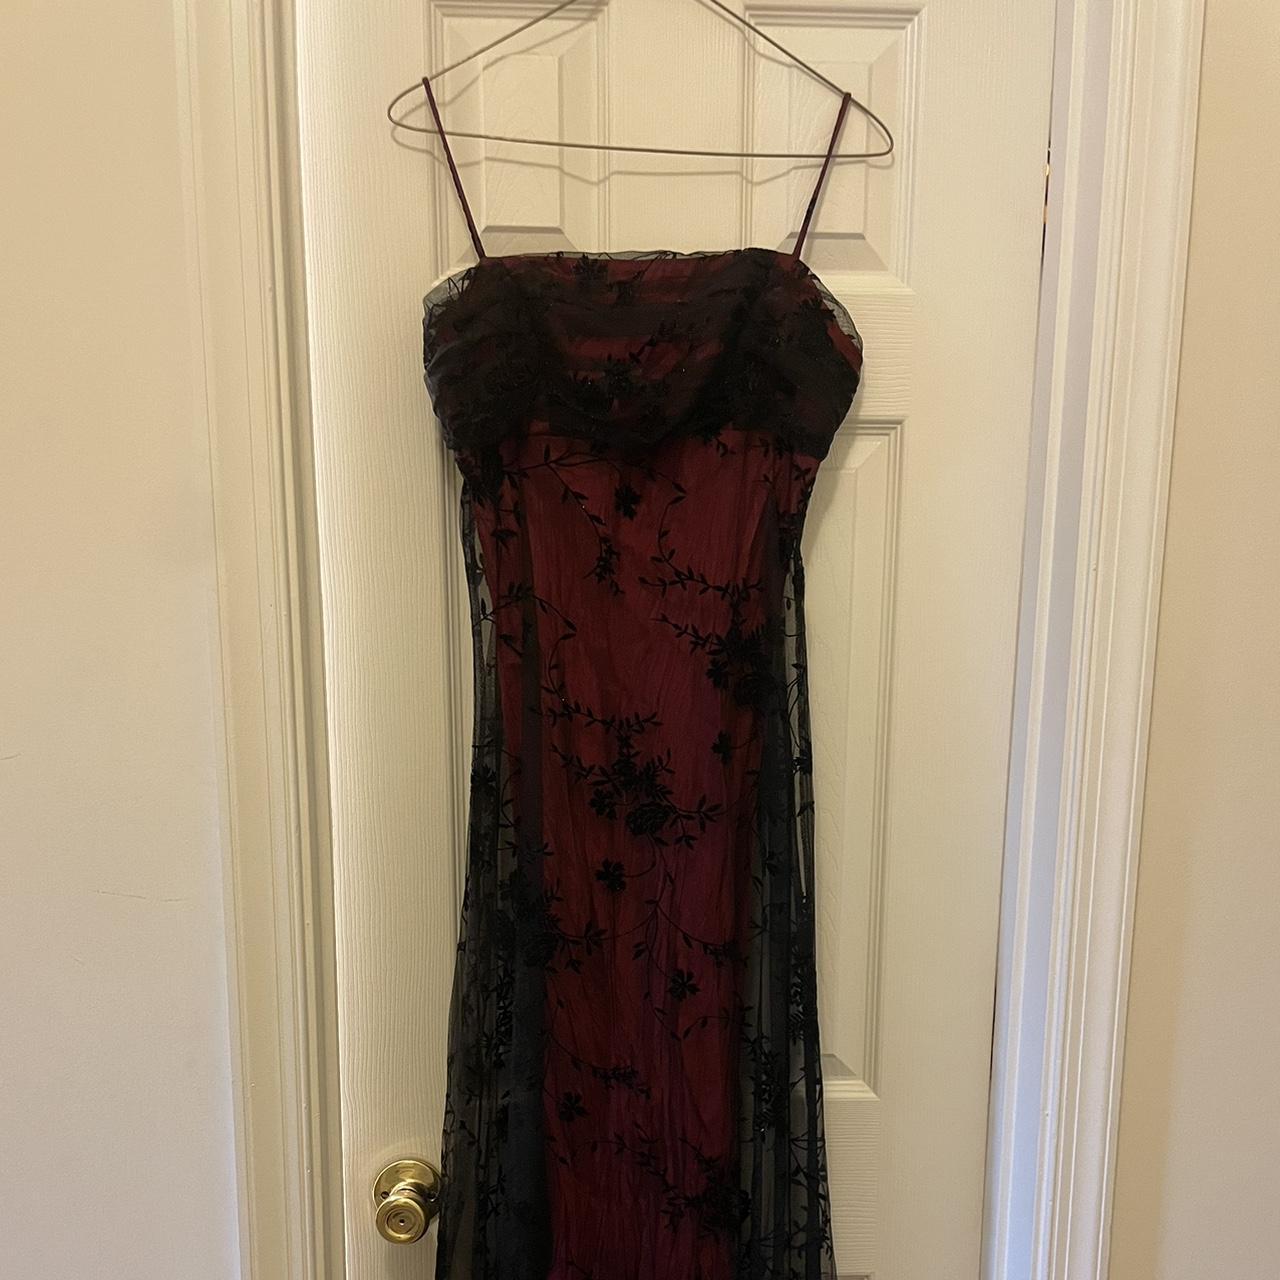 90s goth prom dress / very whimsigoth and vampire... - Depop